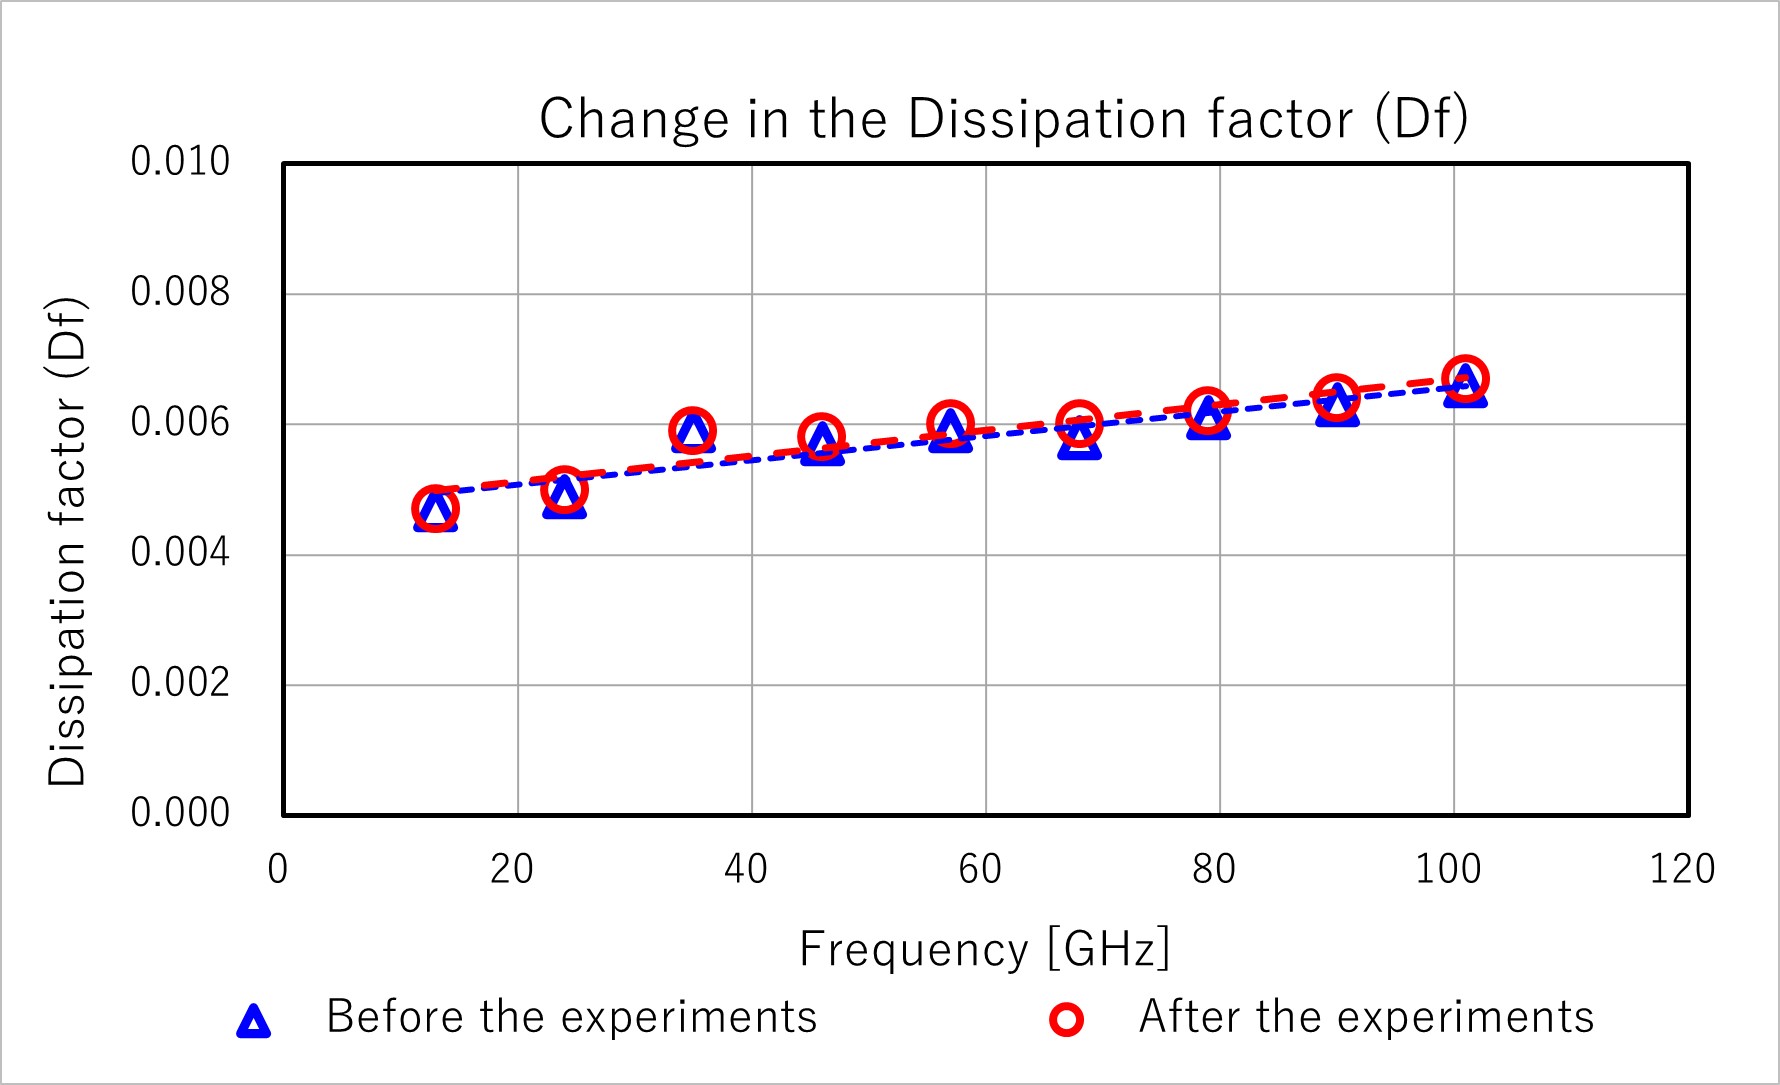 image:Change in the Dissipation factor (Df)